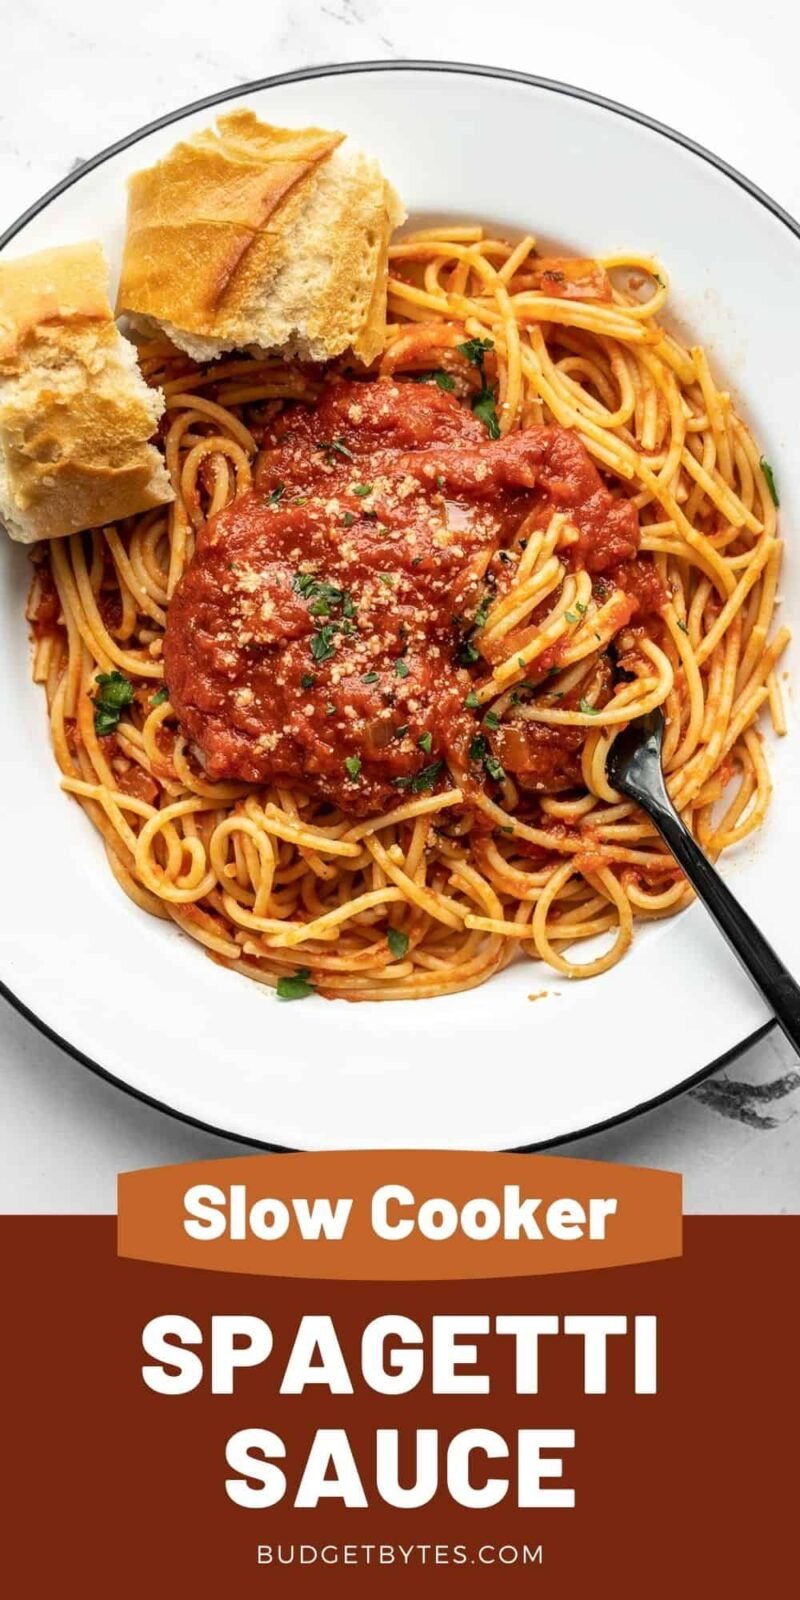 A plate of pasta with spaghetti sauce and bread on the side